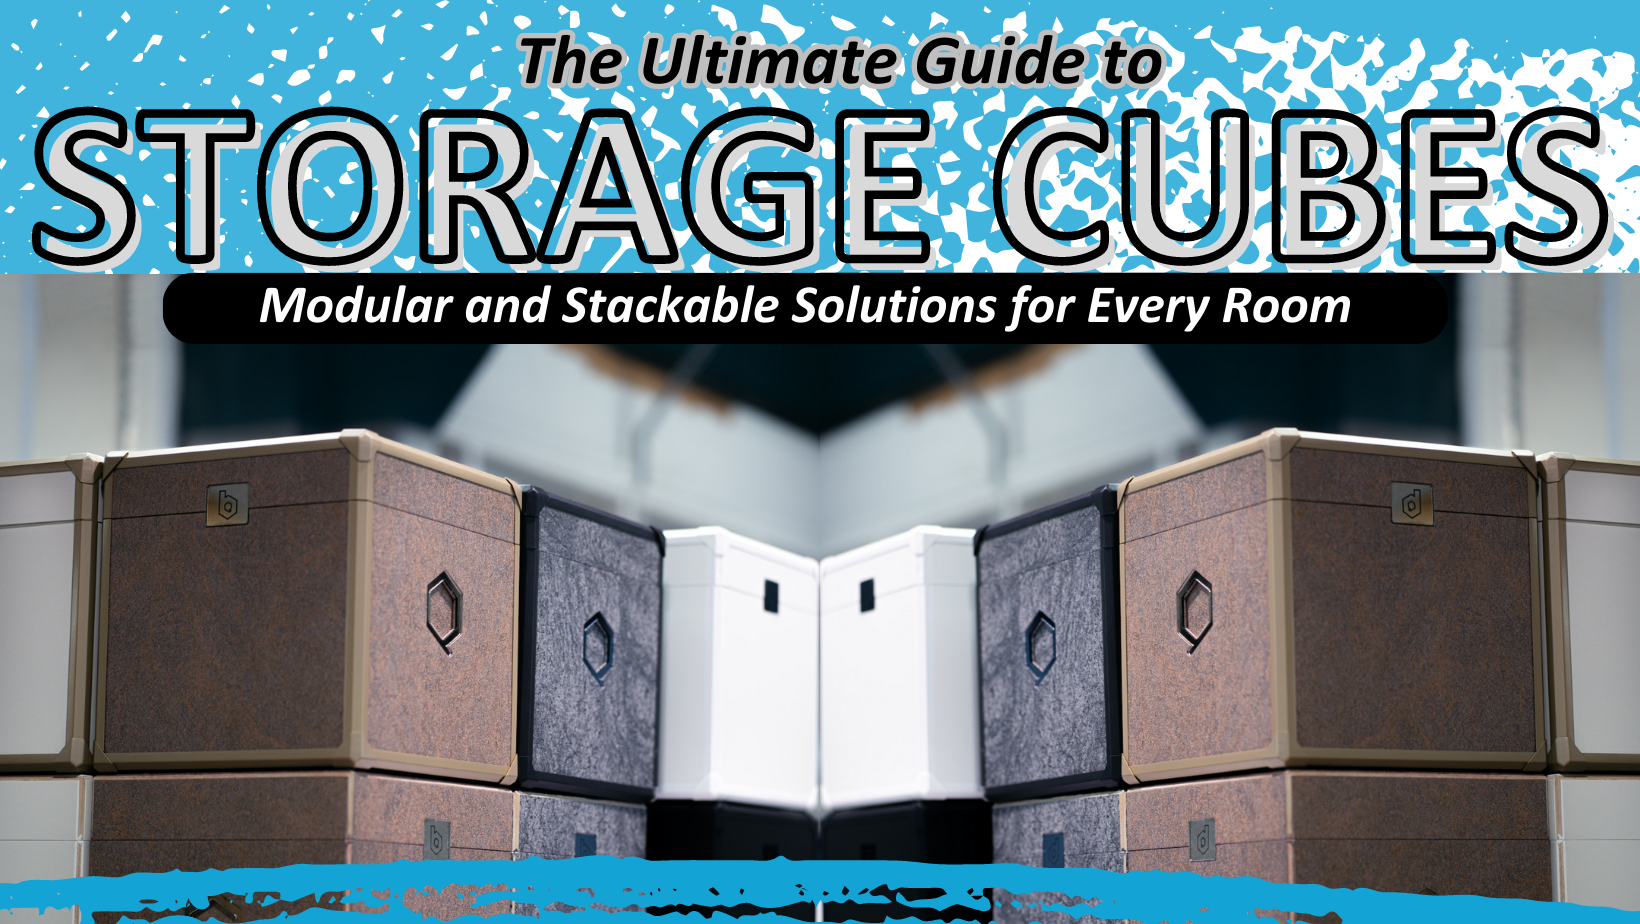 The Ultimate Guide to Storage Cubes: Modular and Stackable Solutions for Every Room